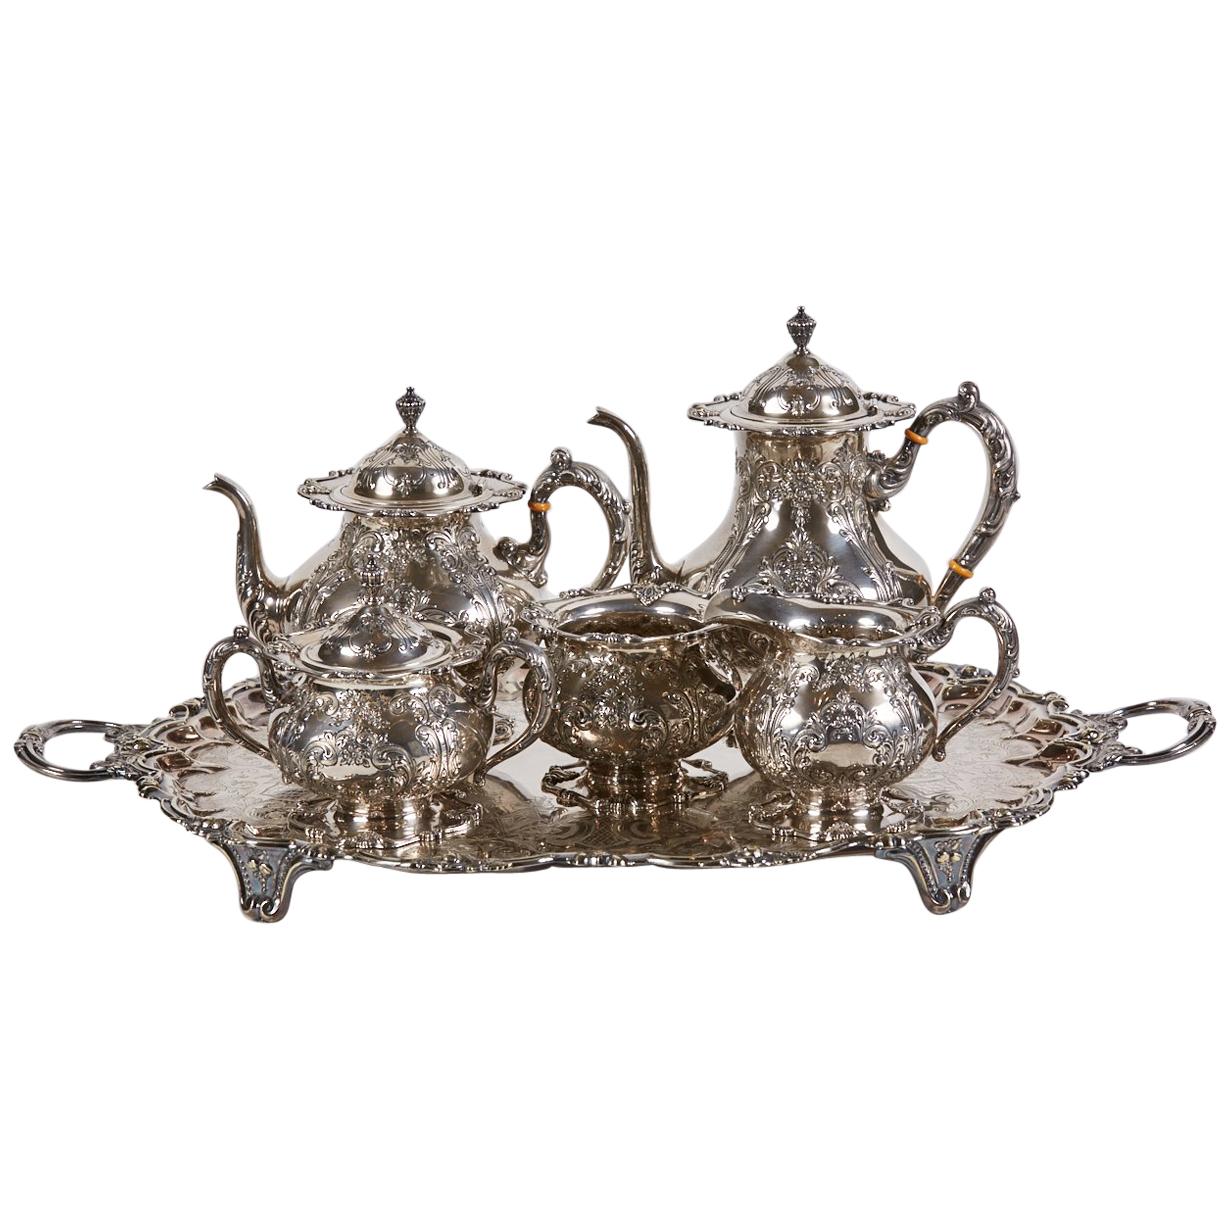 Frank M. Whiting 6-Piece Sterling Silver Tea and Coffee Service including Tray